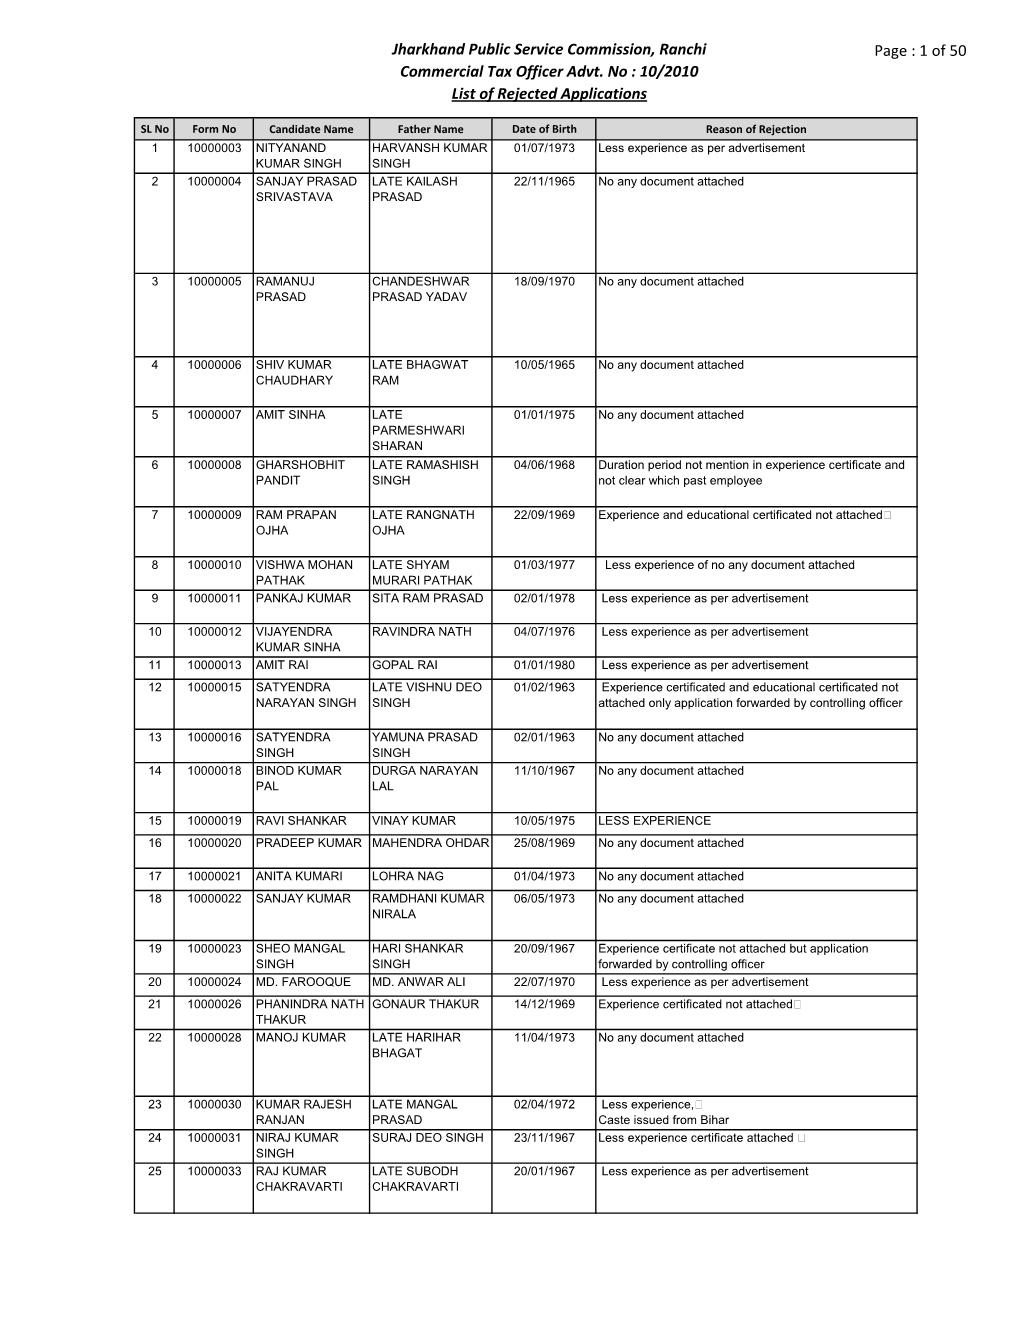 Jharkhand Public Service Commission, Ranchi Commercial Tax Officer Advt. No : 10/2010 List of Rejected Applications Page : 1 Of